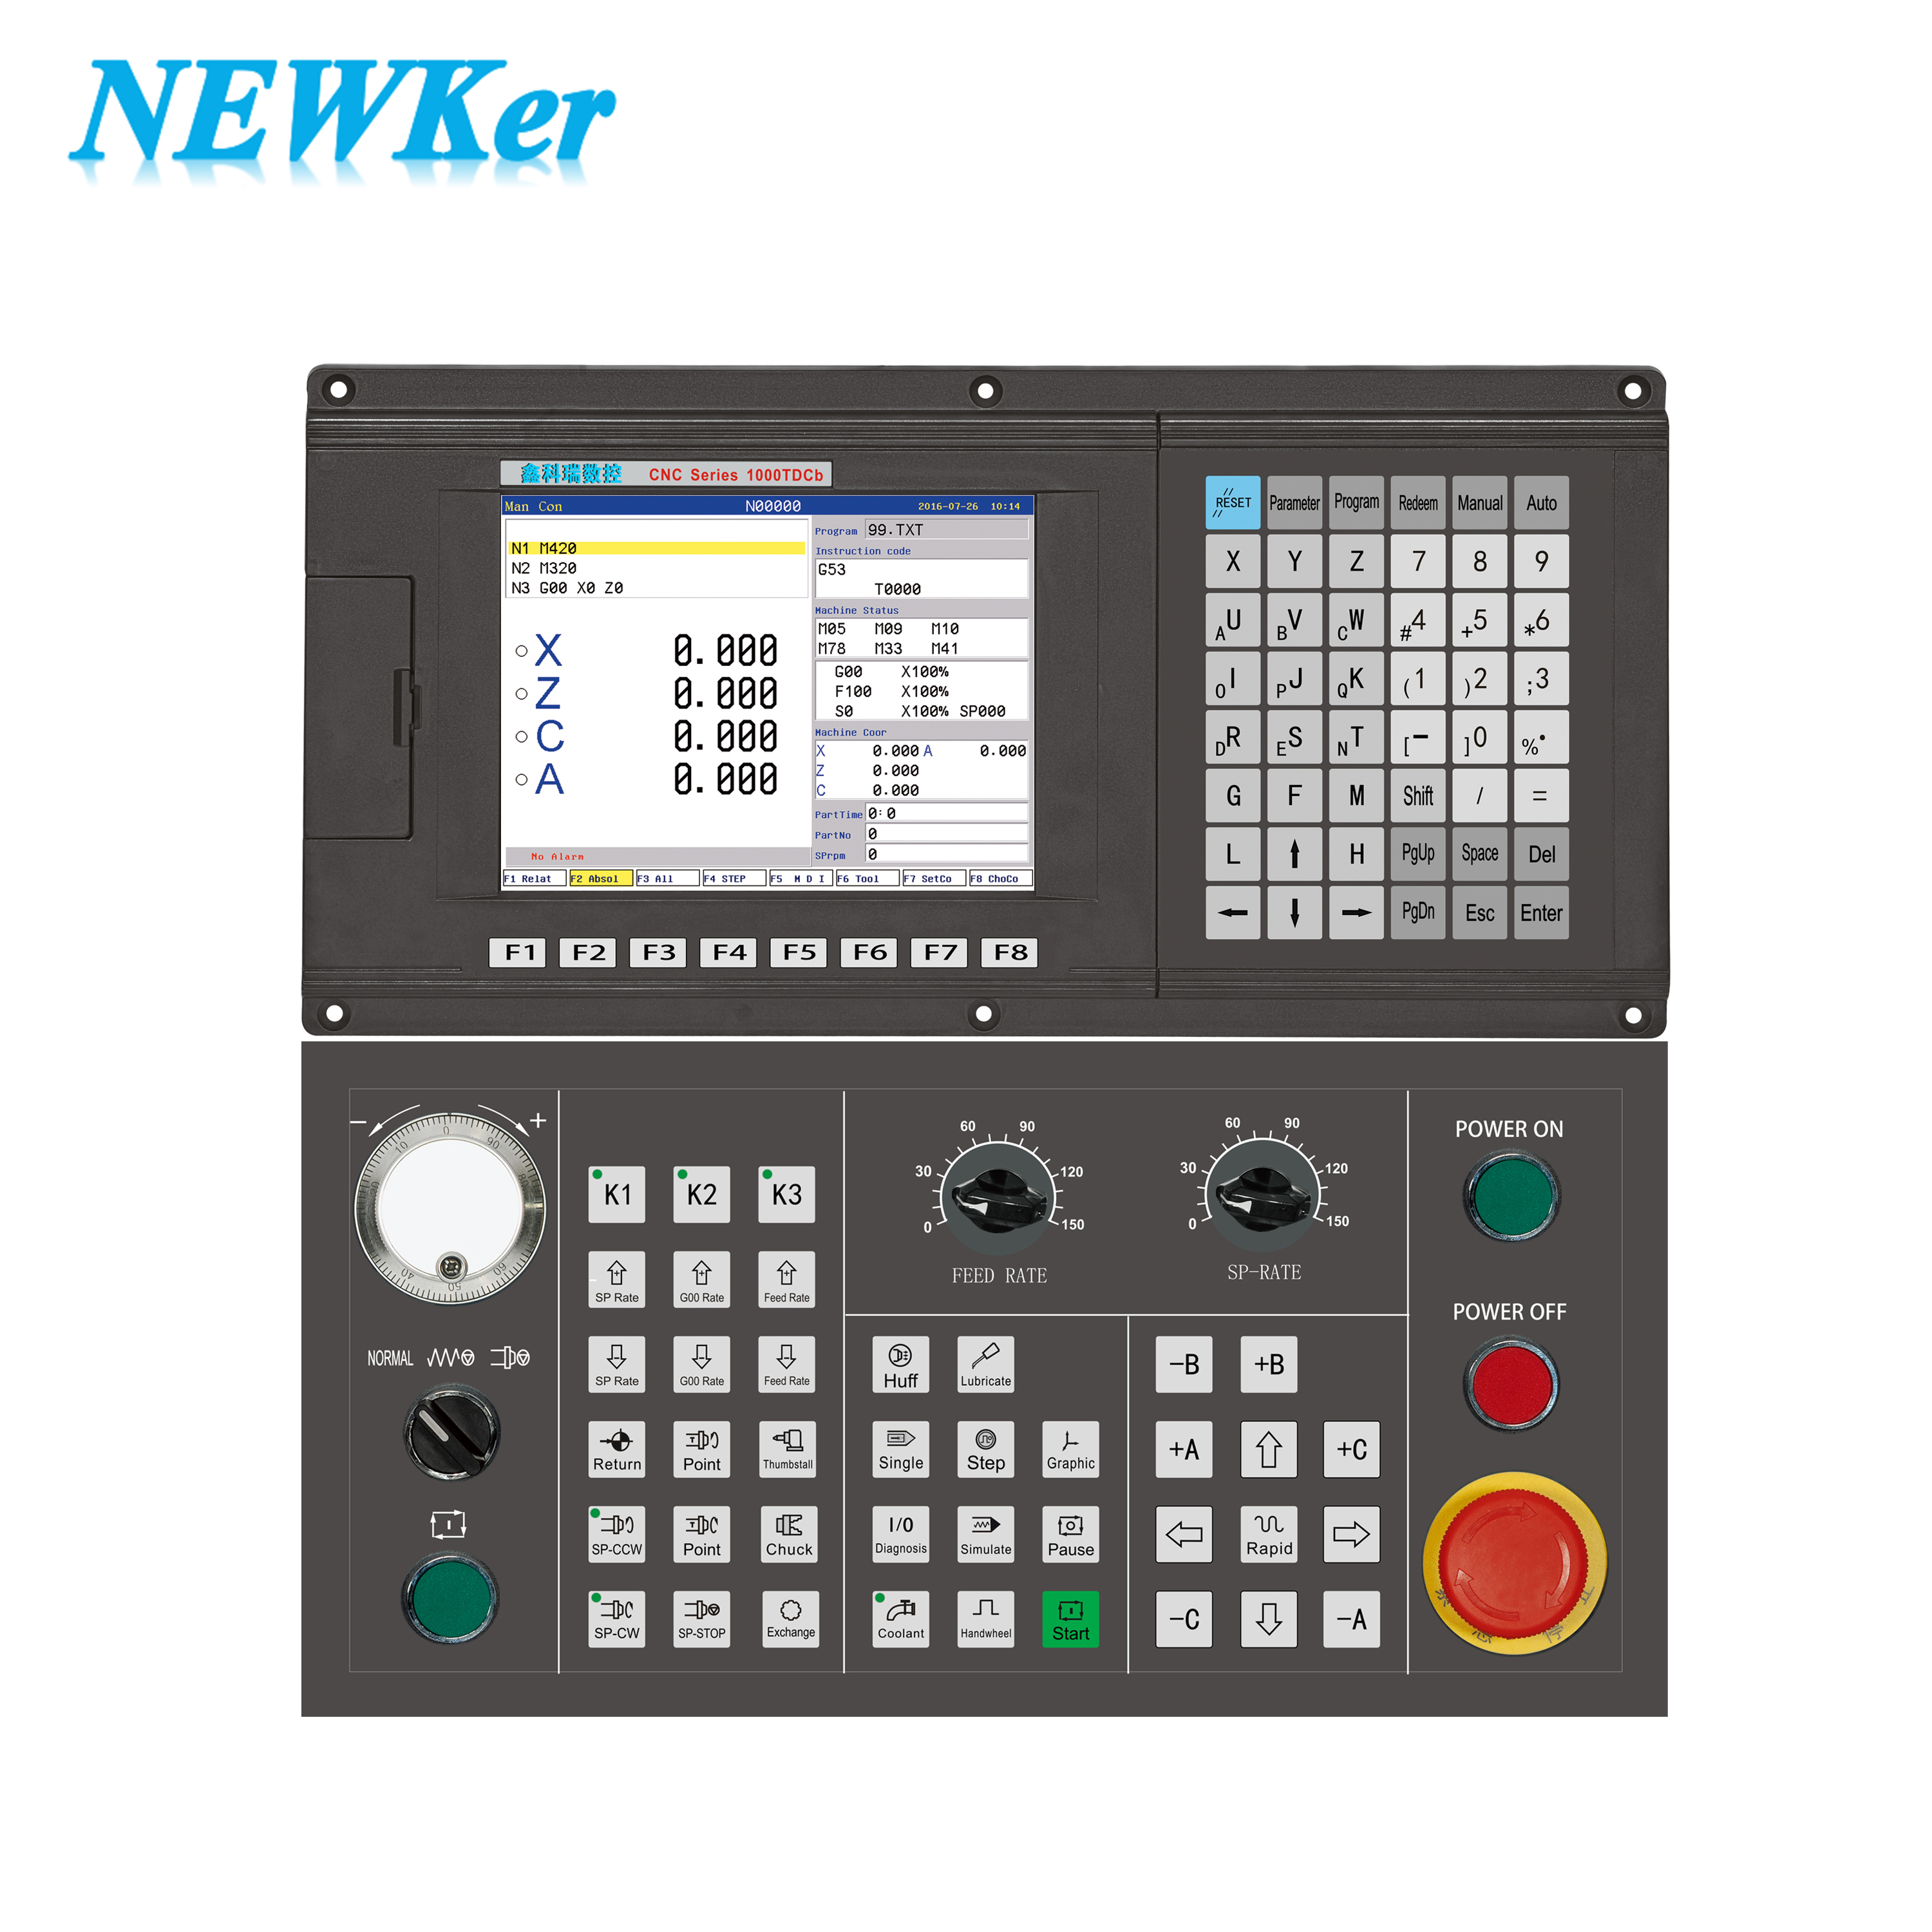 1000 Series 2 3 4 5 Axis Machining Center Controller with RTCP function